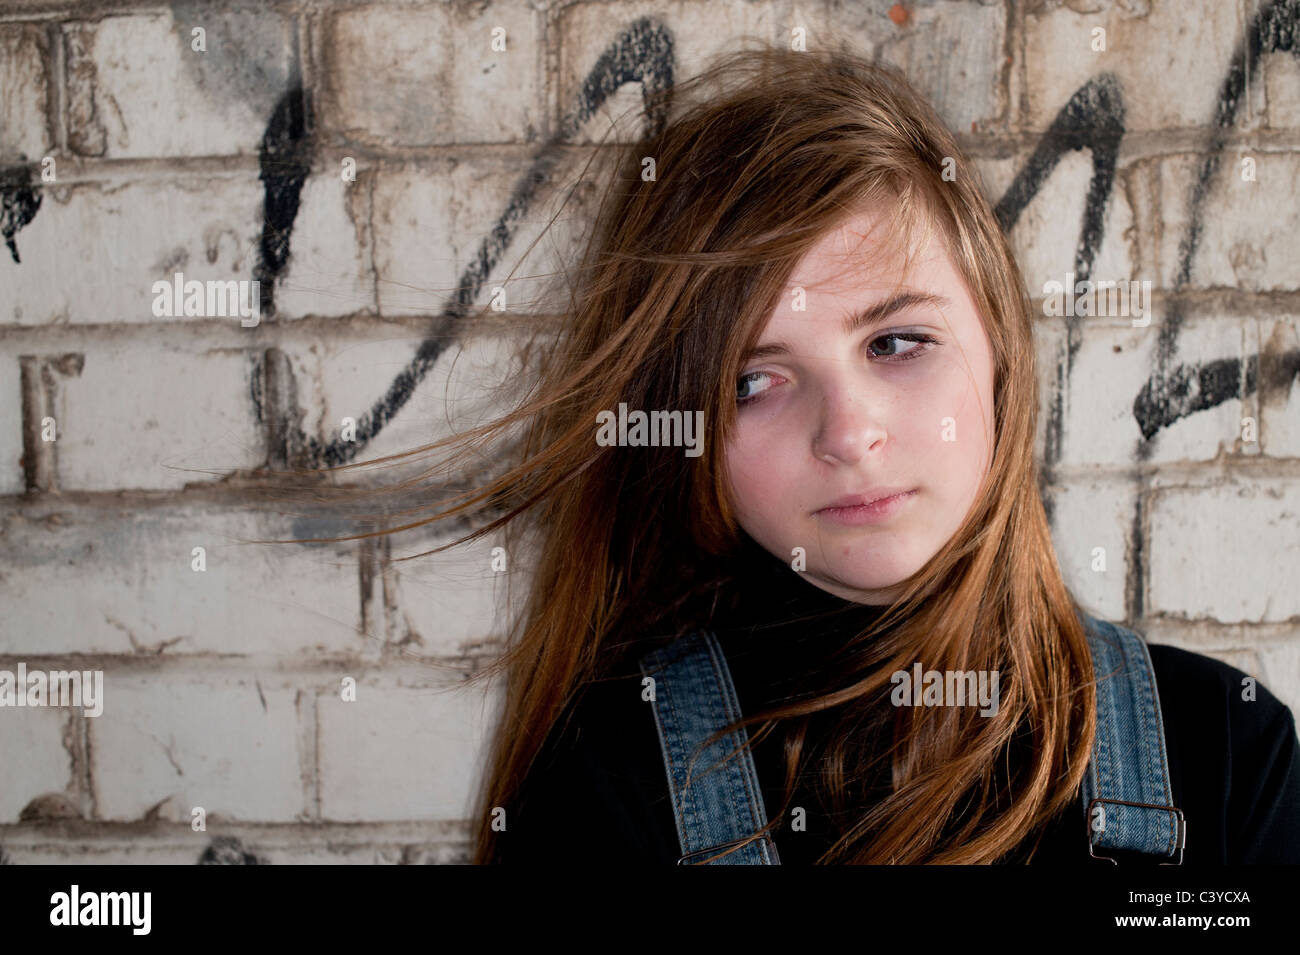 13 Year Old Teenage Girl Uk High Resolution Stock Photography And Images Alamy